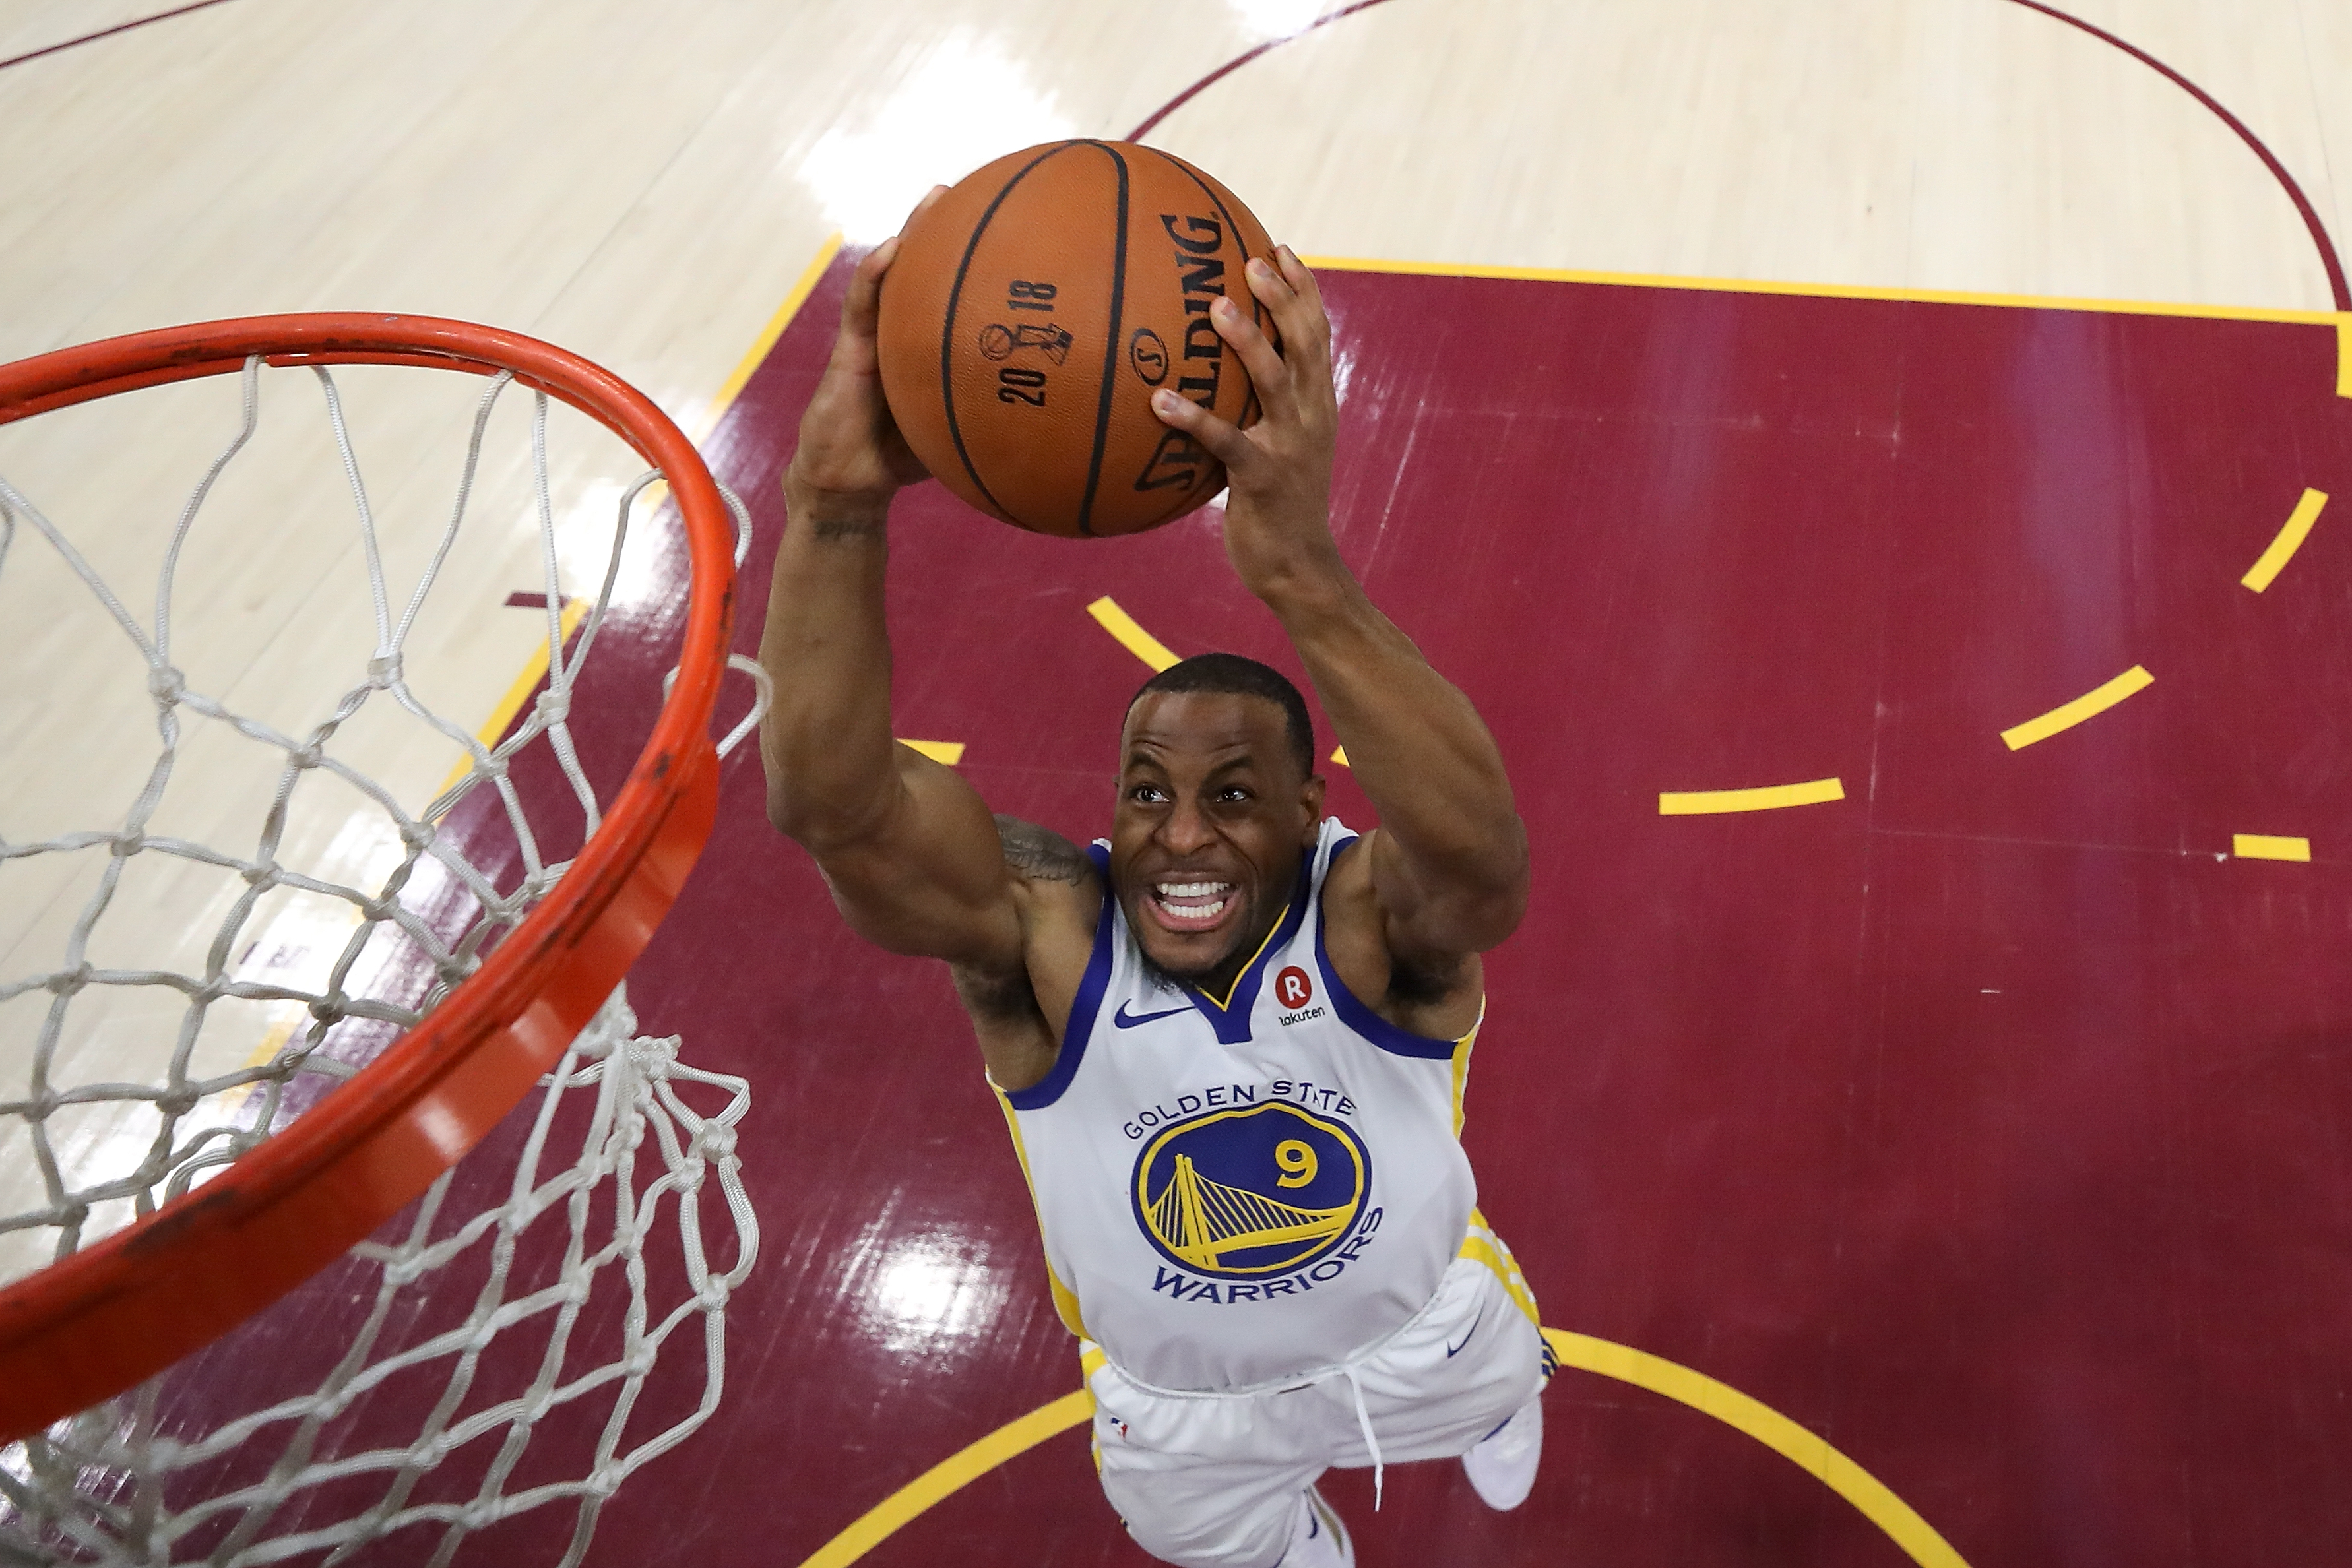 Andre Iguodala Fined For Throwing Ball Into Moda Center Crowd